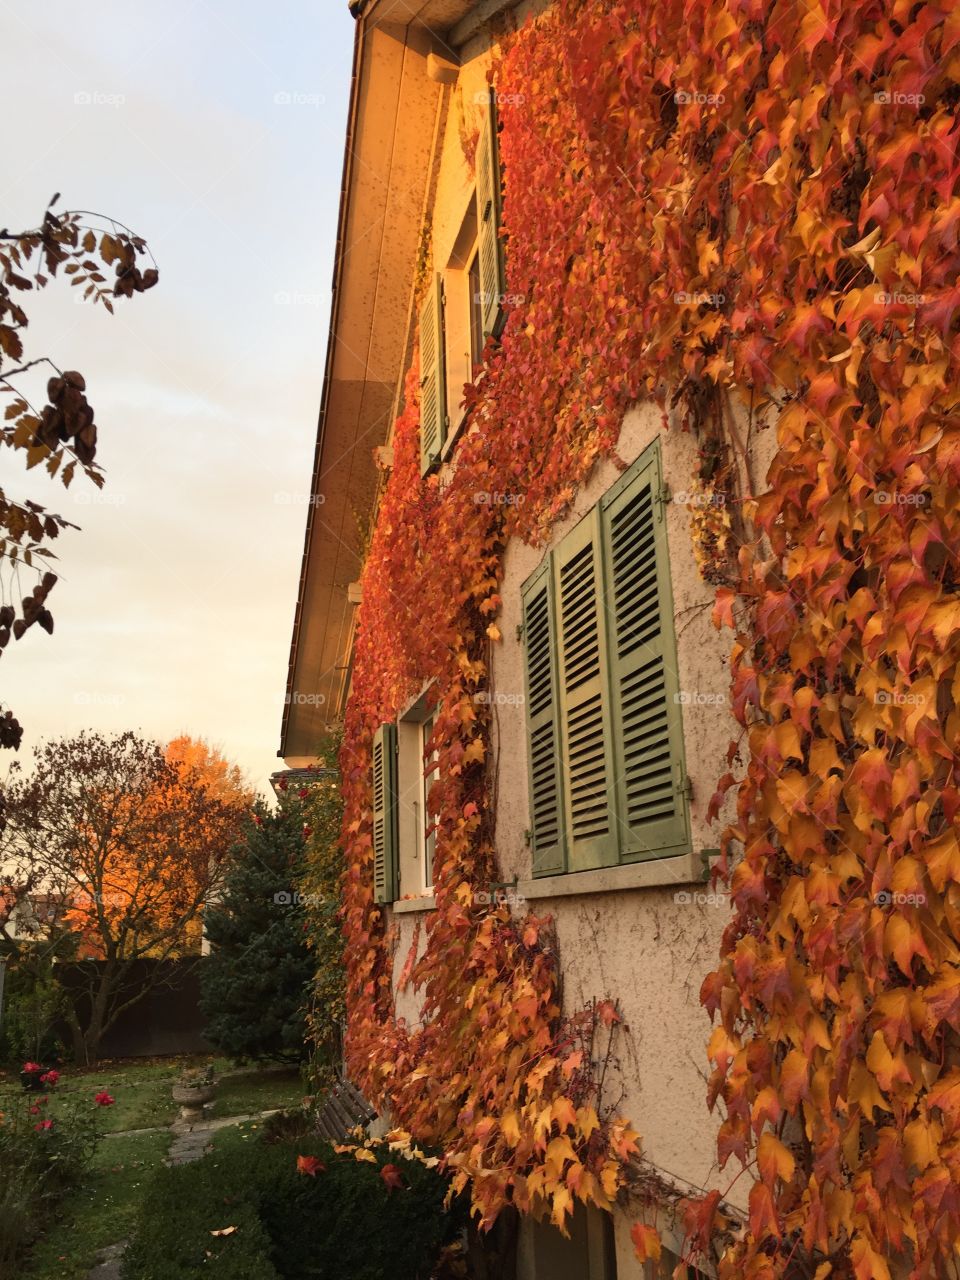 No Person, Architecture, Fall, House, Leaf